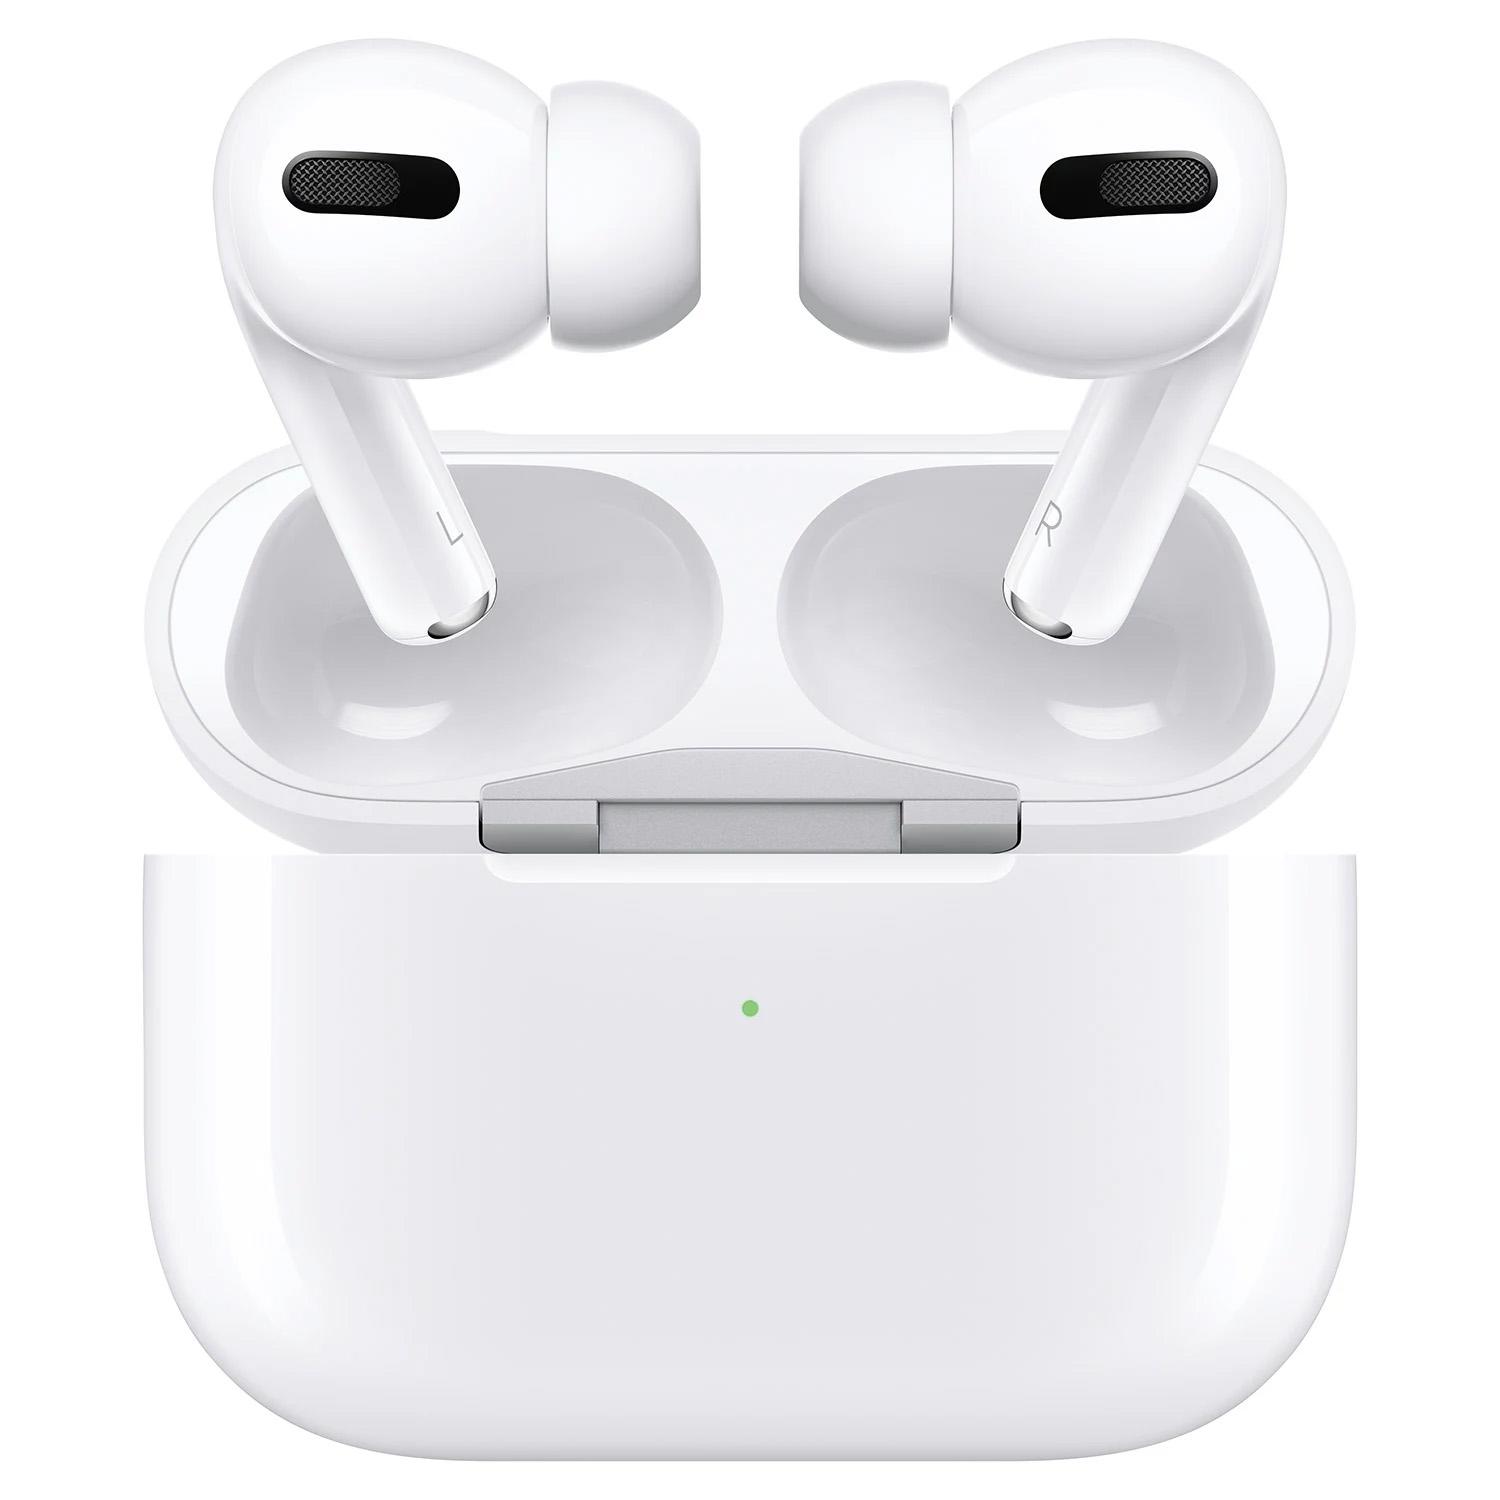 Apple AirPods Pro for Sams Club Members for $179.98 Shipped